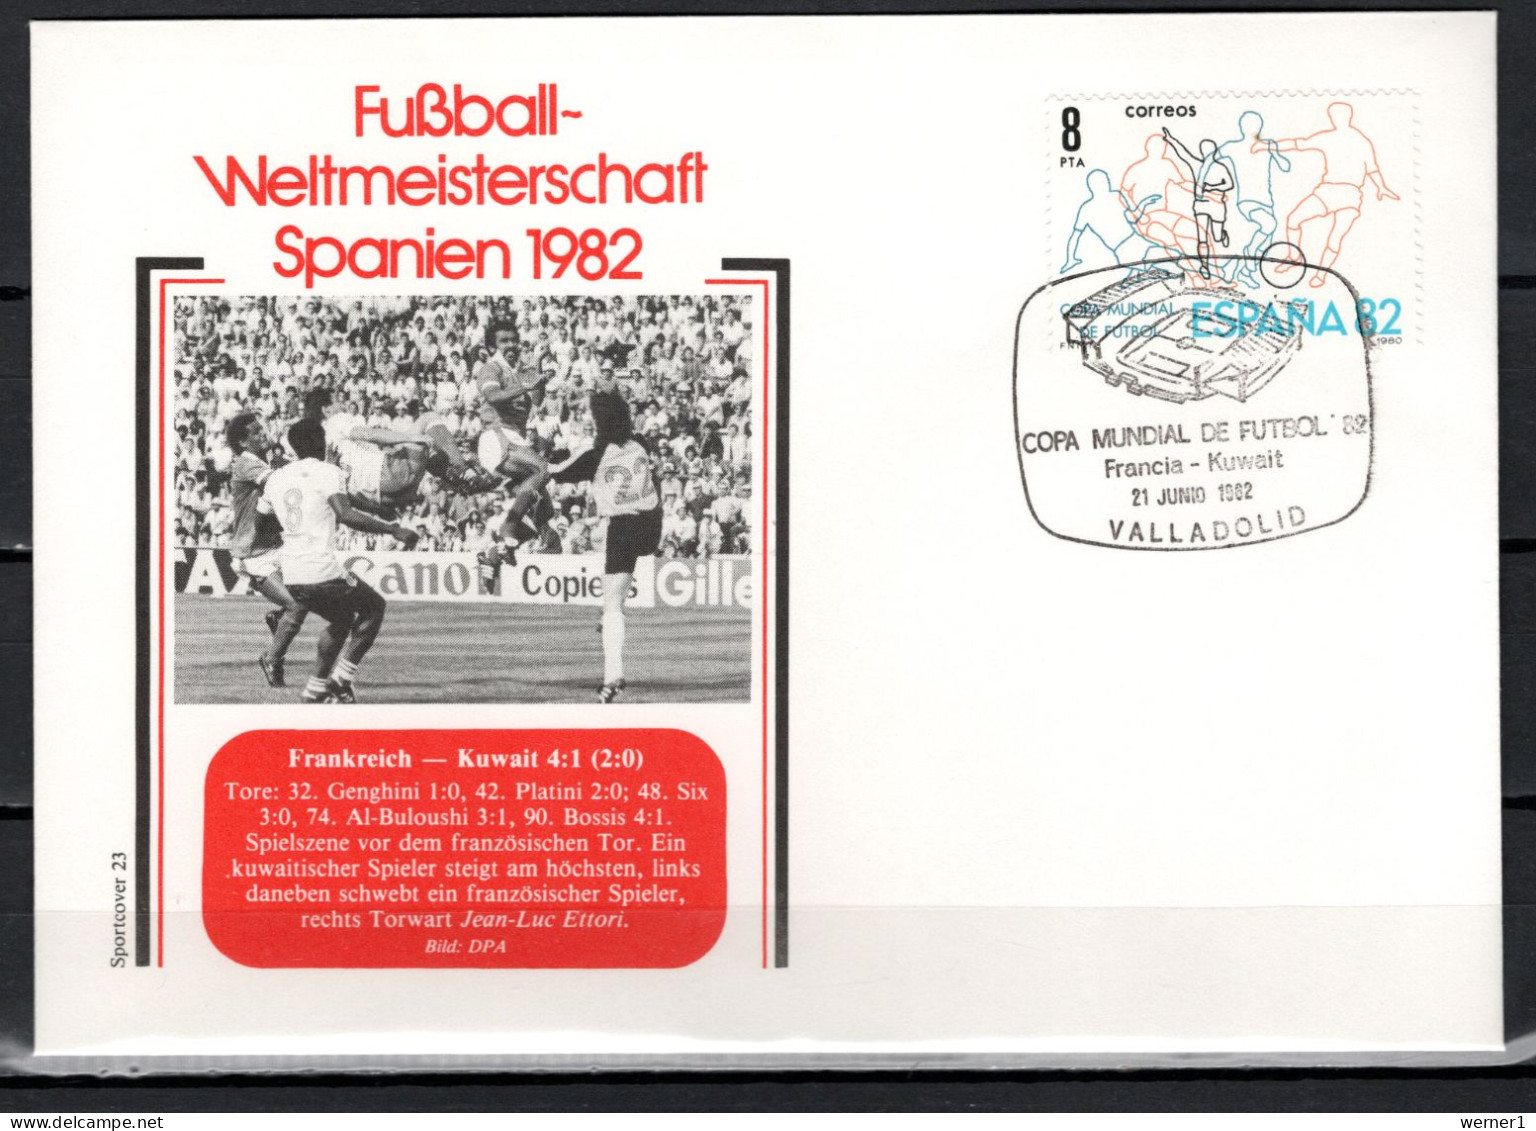 Spain 1982 Football Soccer World Cup Commemorative Cover Match France - Kuwait 4:1 - 1982 – Espagne